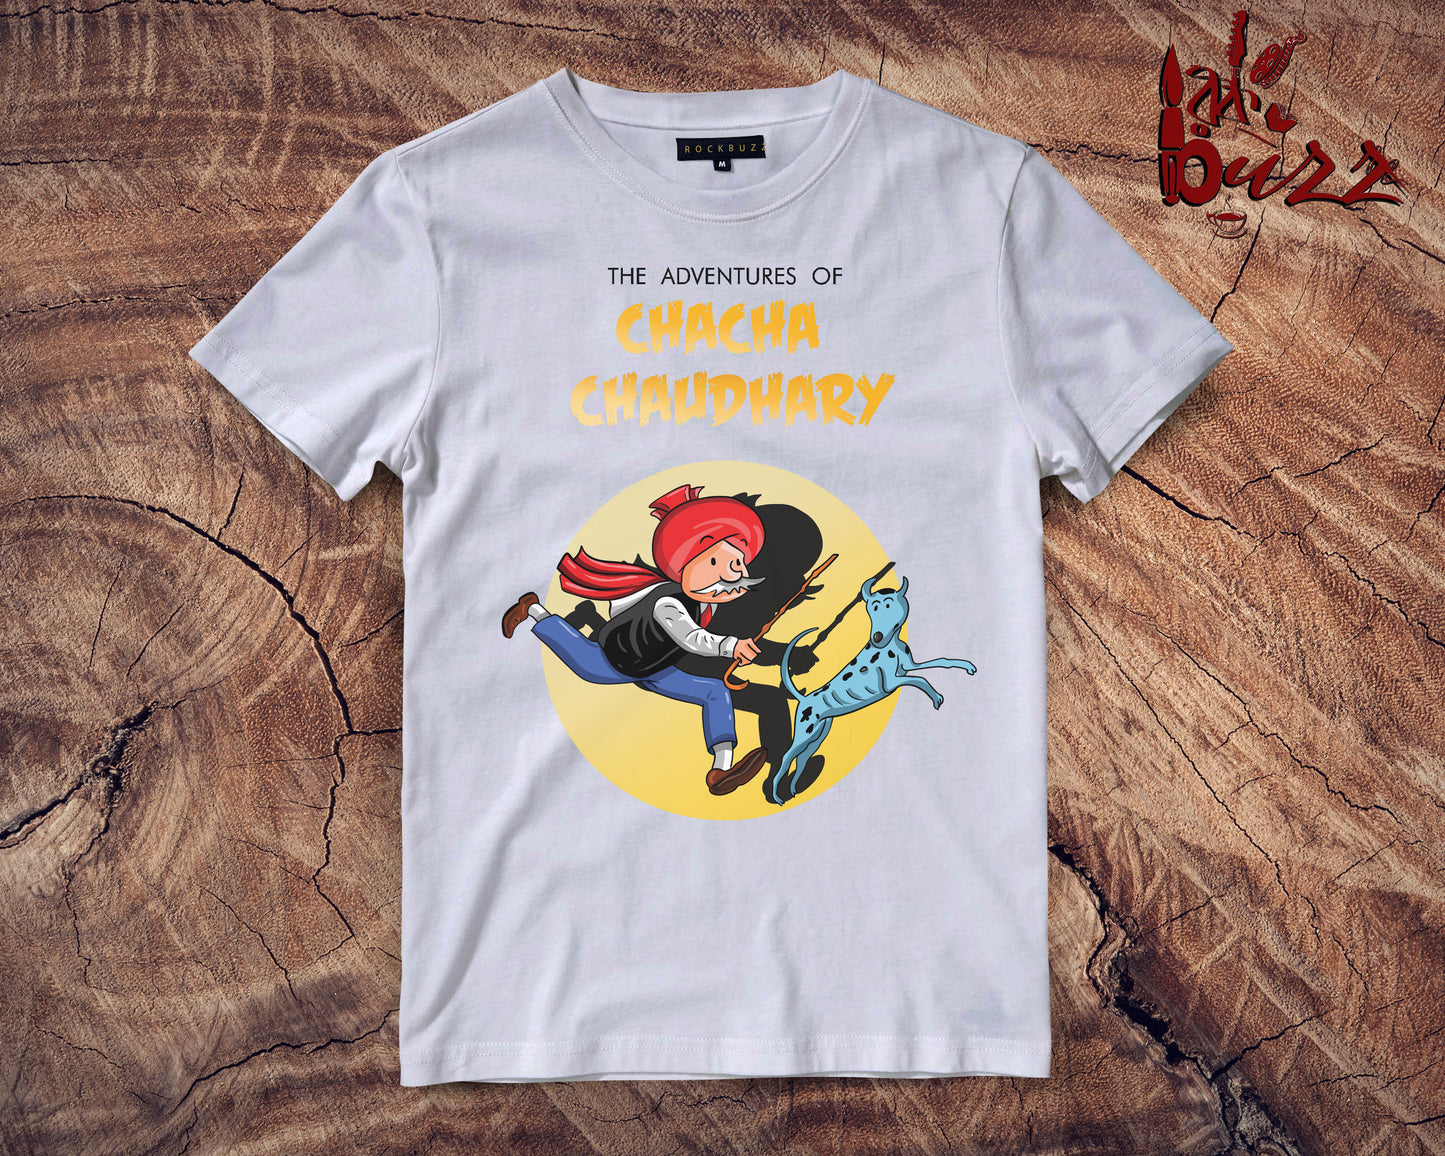 Chacha Choudhury quoted Unisex and ladies T Shirt